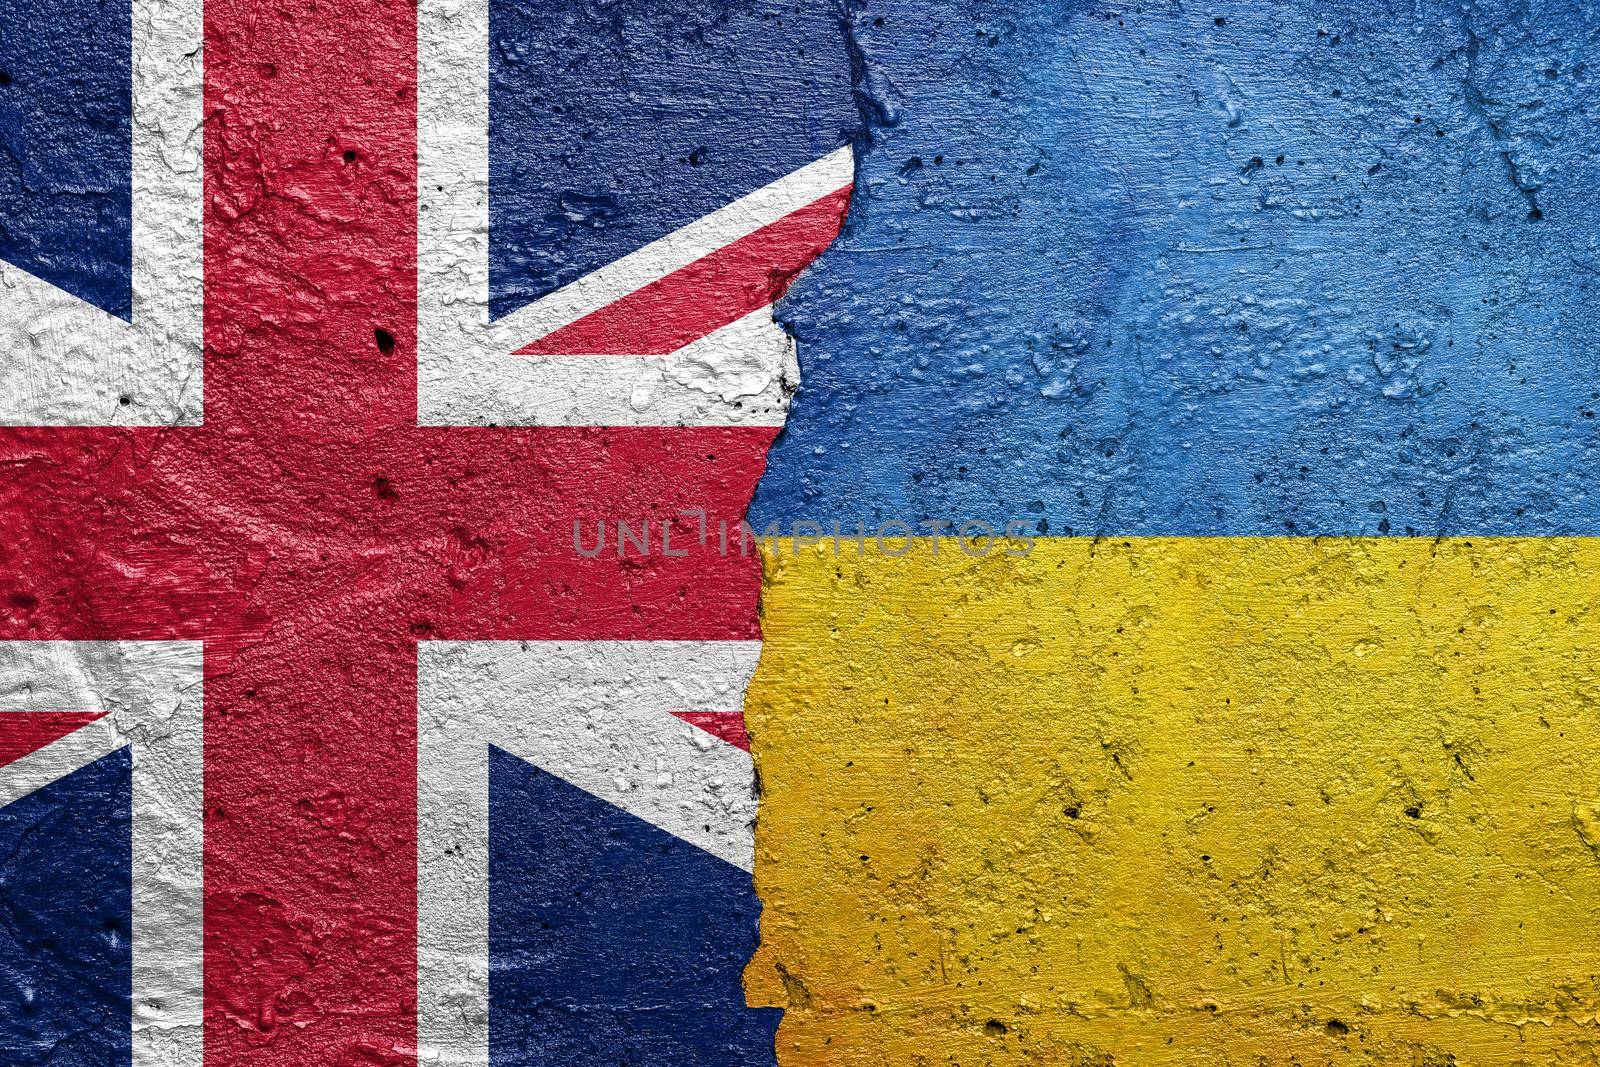 United Kingdom and Ukraine - Cracked concrete wall painted with a UK flag on the left and a Ukrainian flag on the right stock photo by adamr